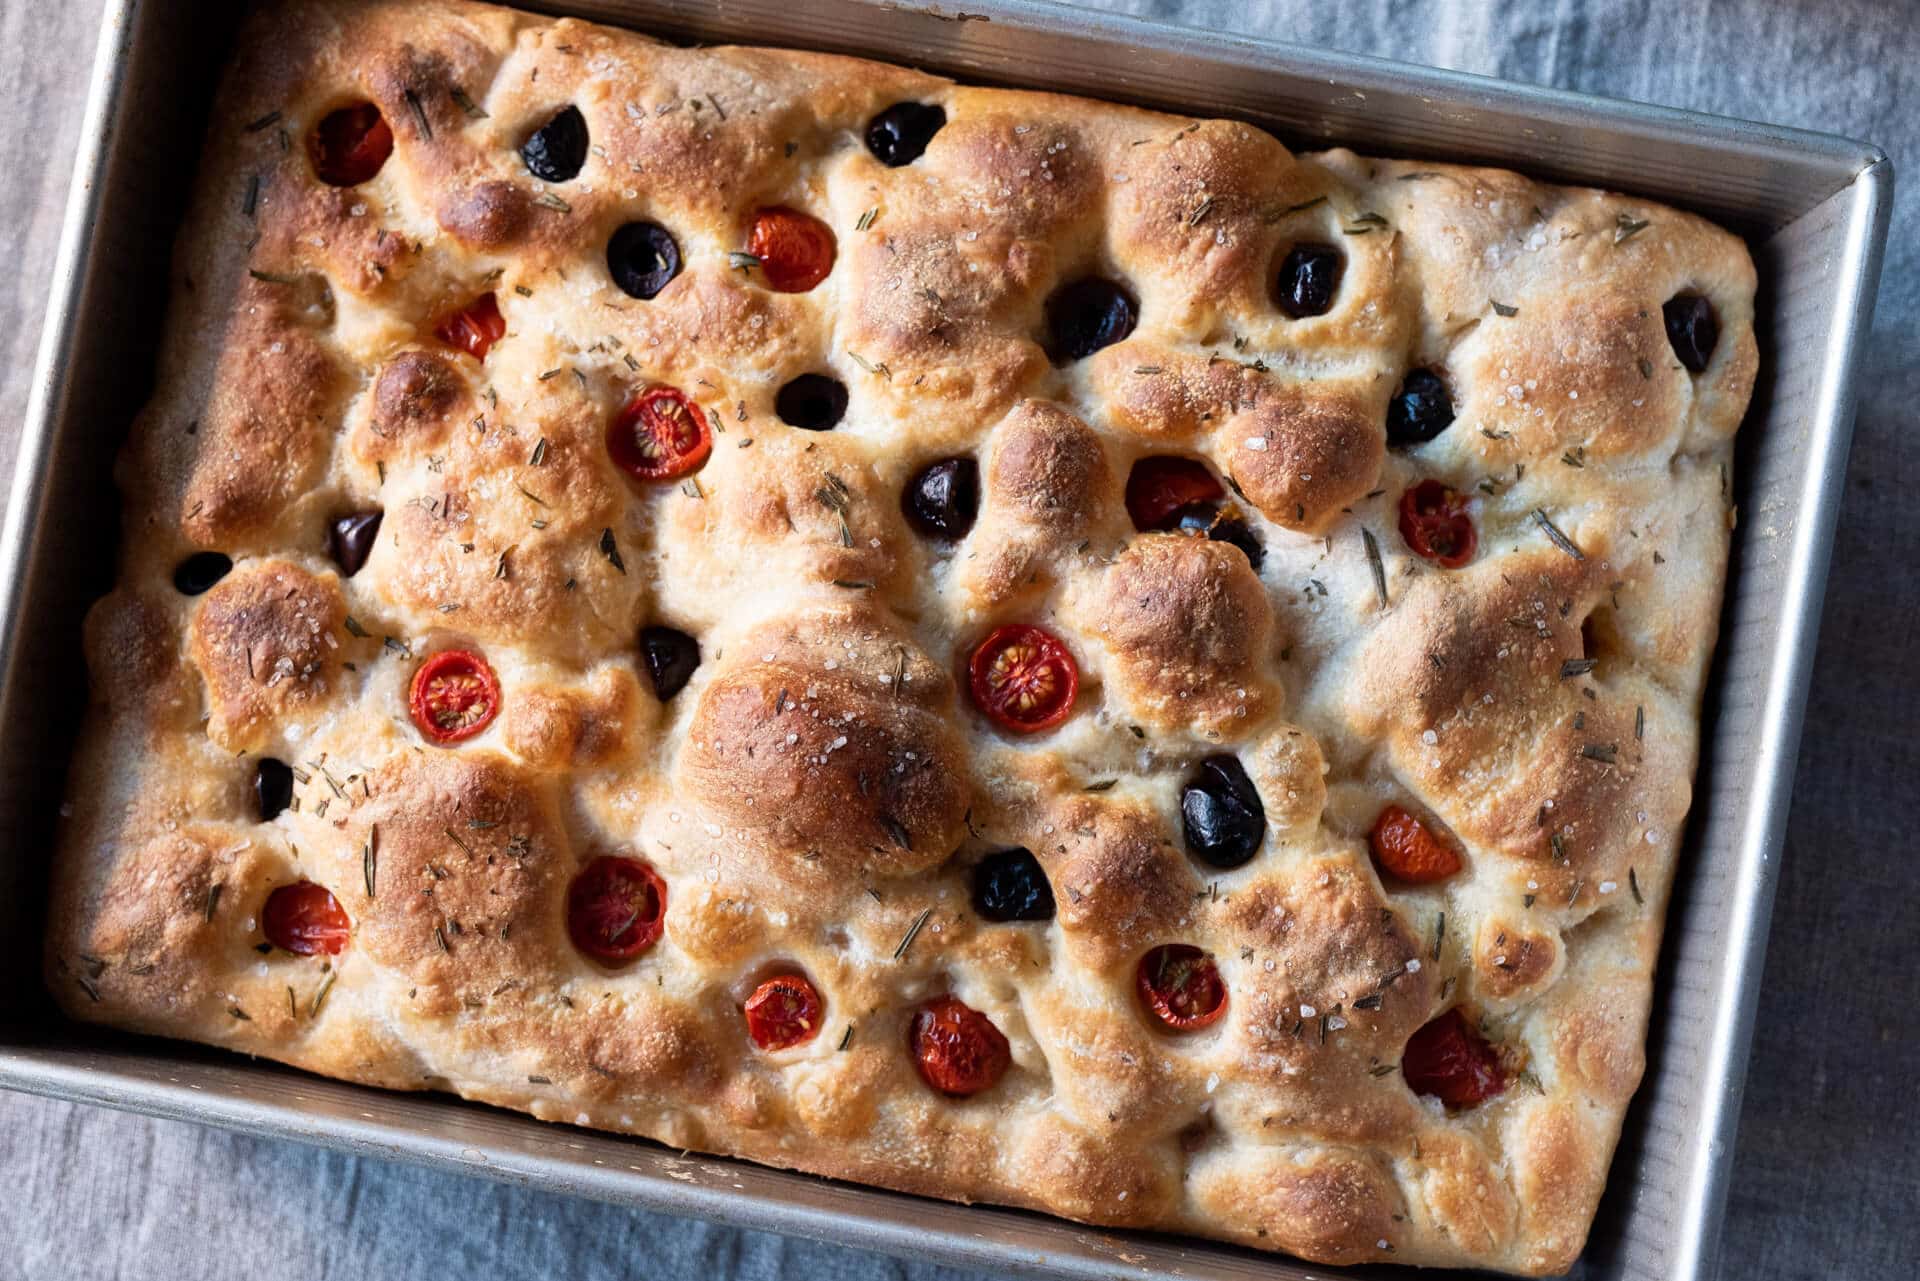 https://www.theperfectloaf.com/wp-content/uploads/2018/11/theperfectloaf-a-simple-focaccia-1.jpg